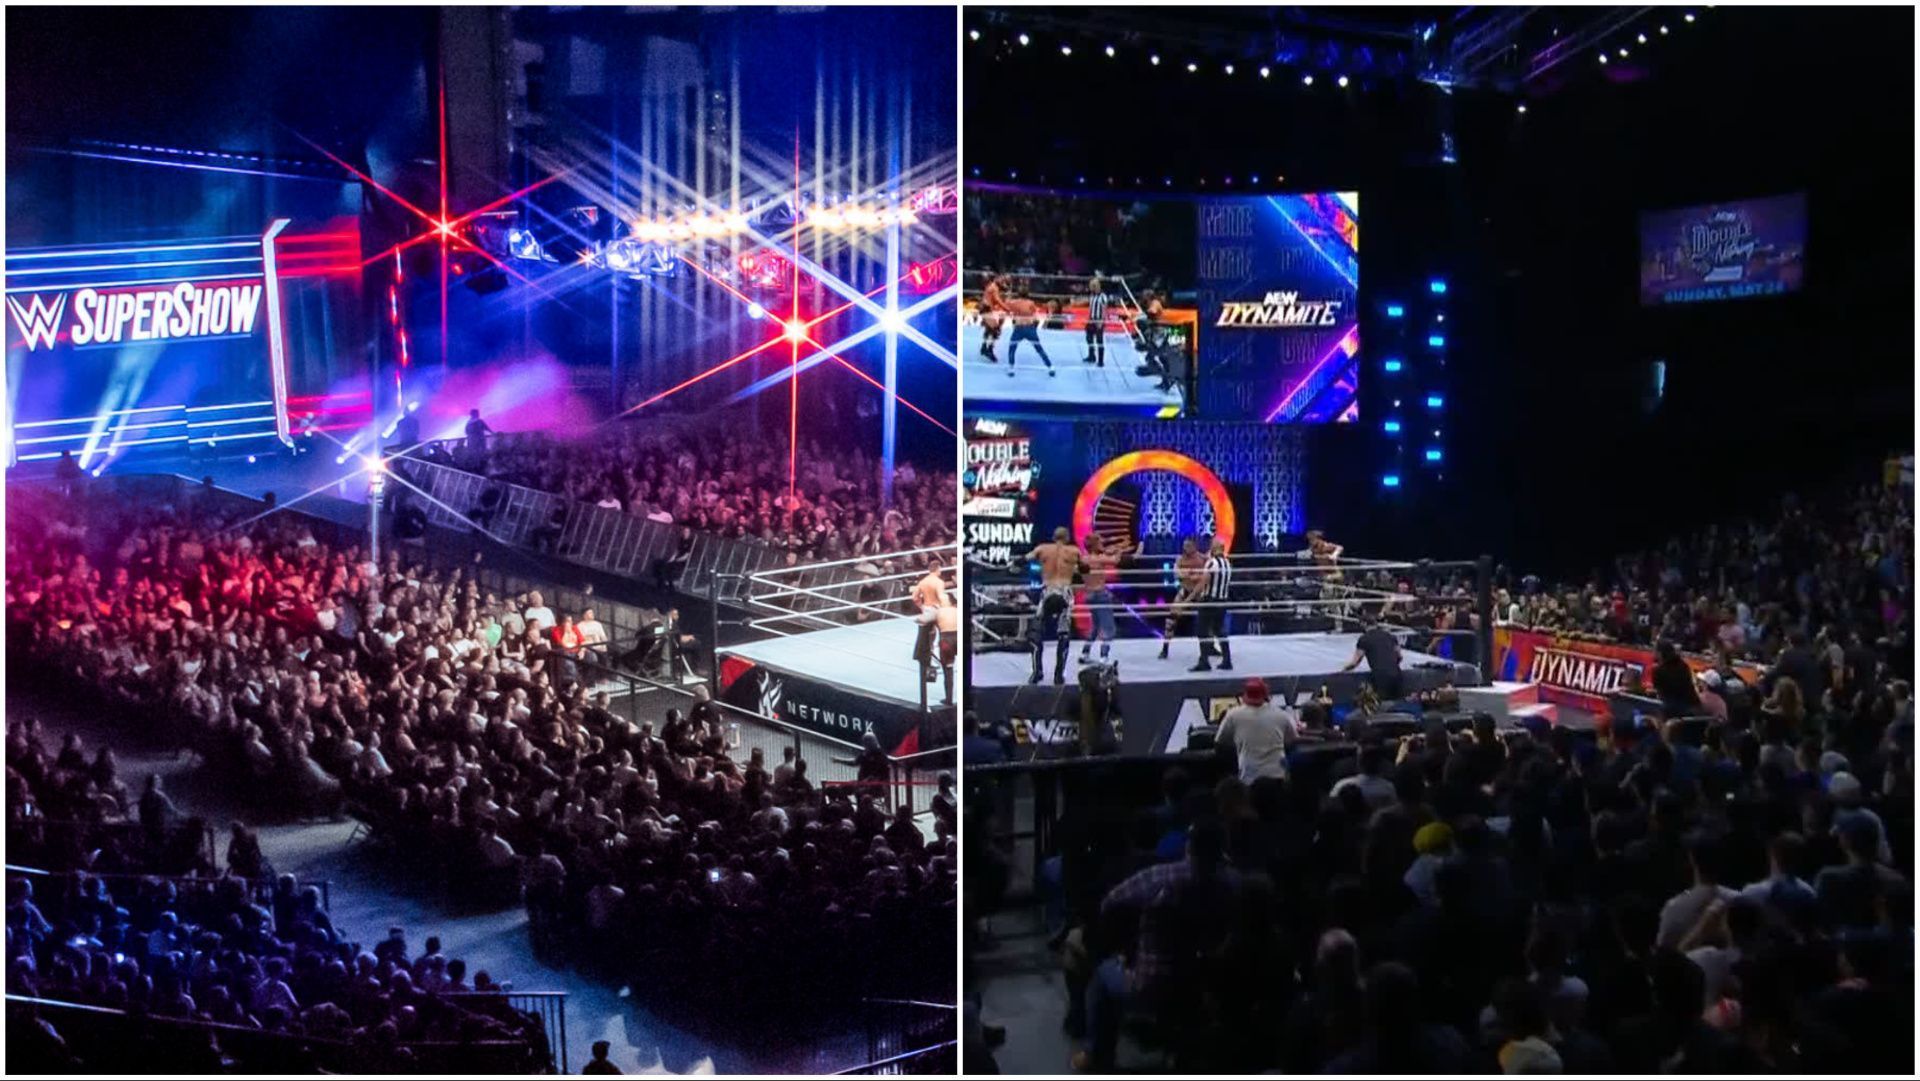 The WWE Universe packs arena for Supershow, AEW Dynamite draws packed crowd